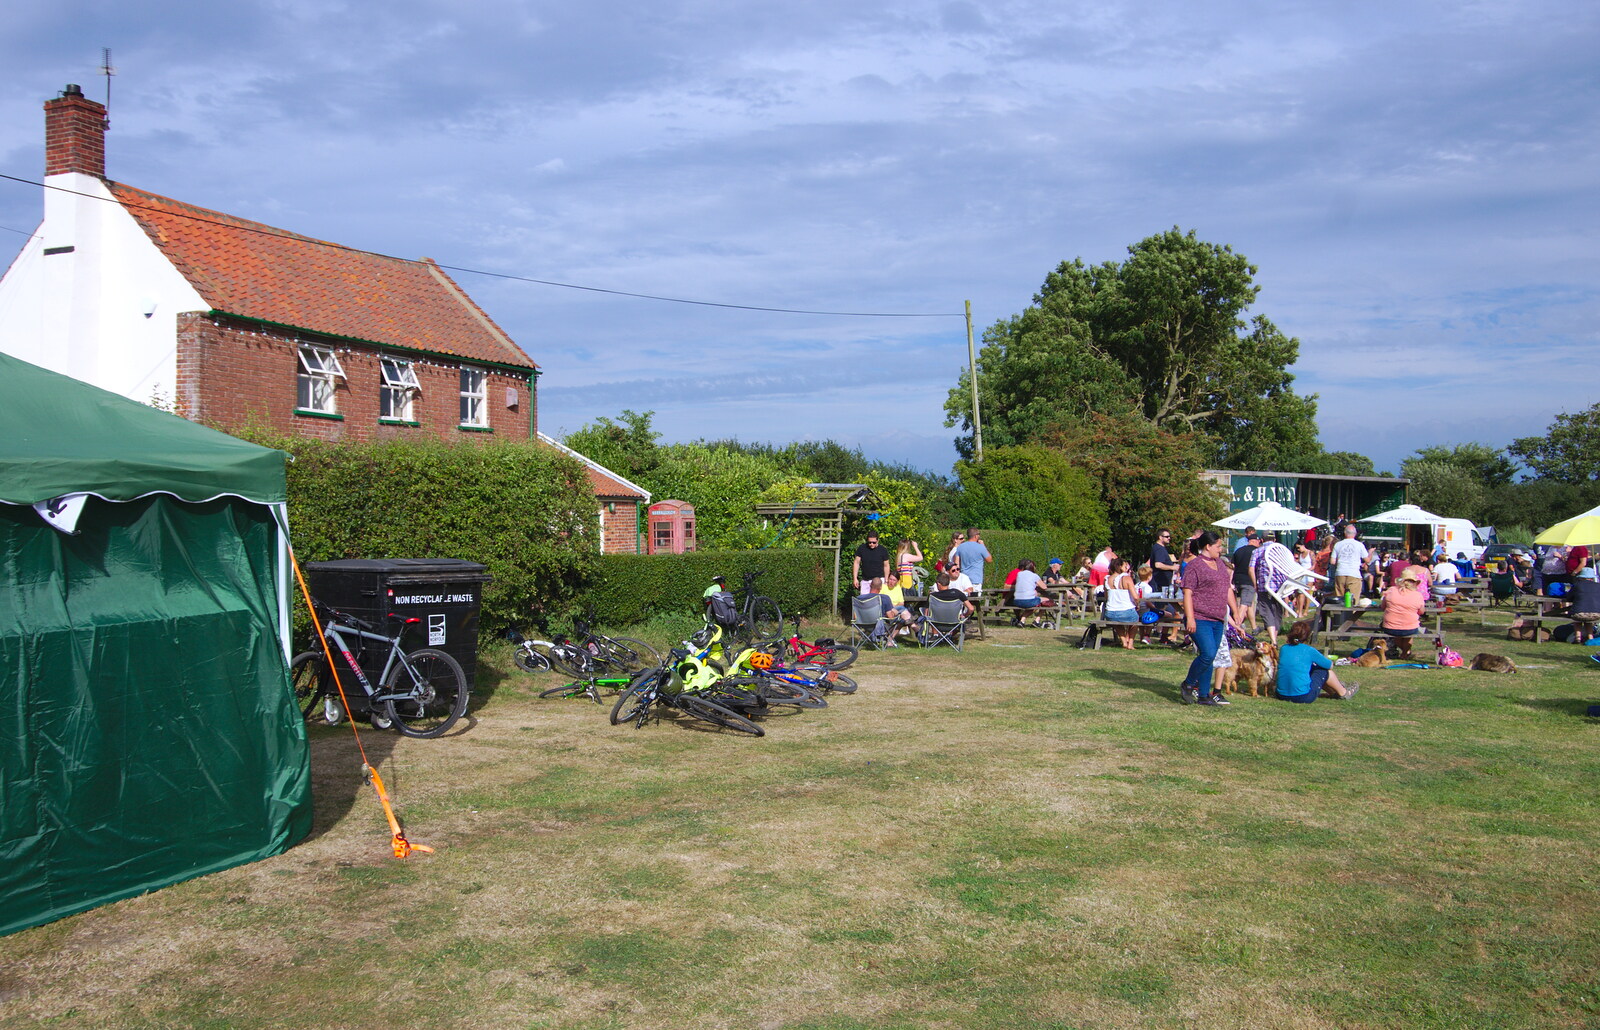 The Nelson's beer garden from Waxham Sands and the Nelson Head Beer Festival, Horsey, Norfolk - 31st August 2019